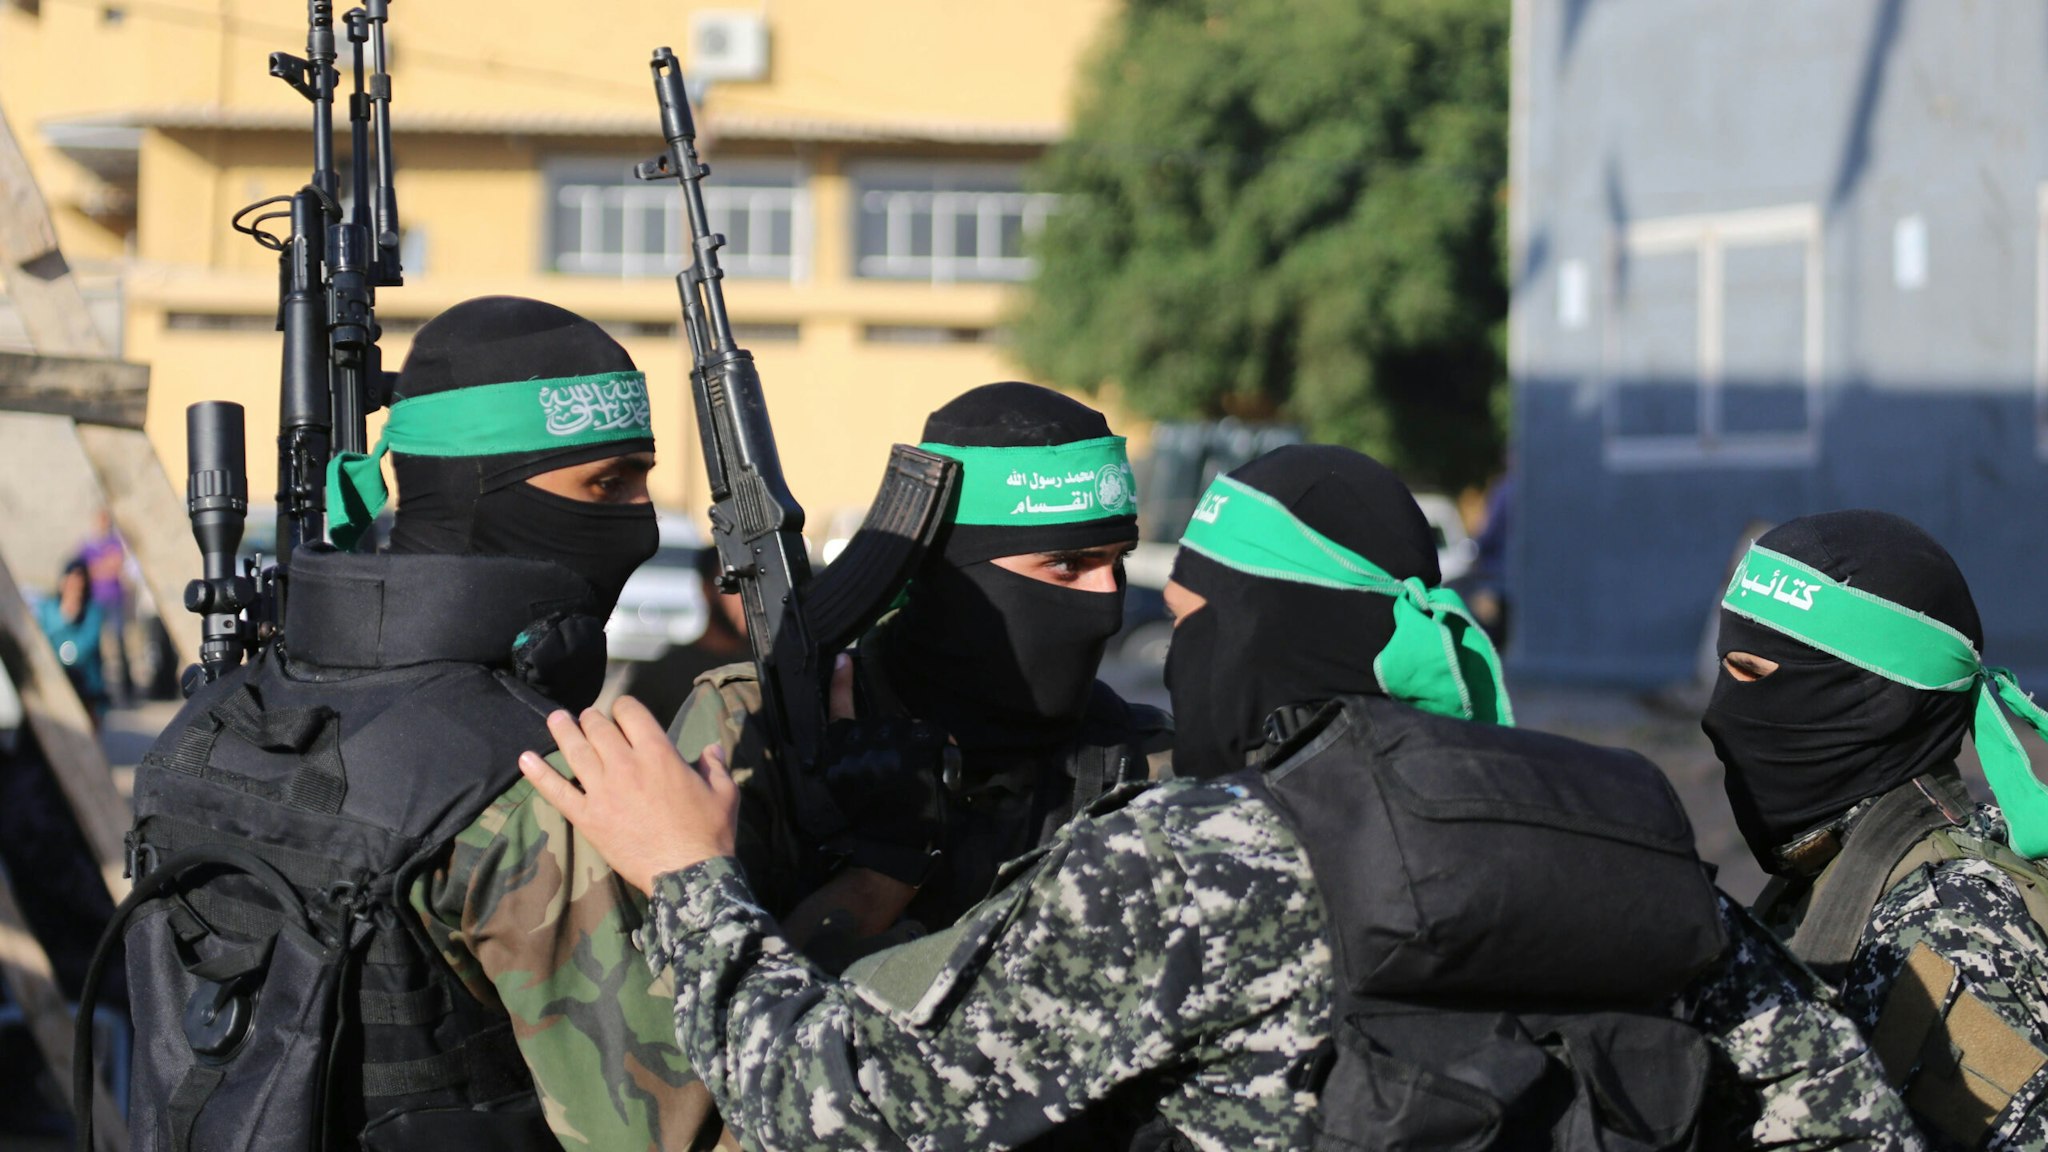 Palestinians supporter of the Islamist movement Hamas during an anti-Israel rally in Gaza City on April 28, 2016.